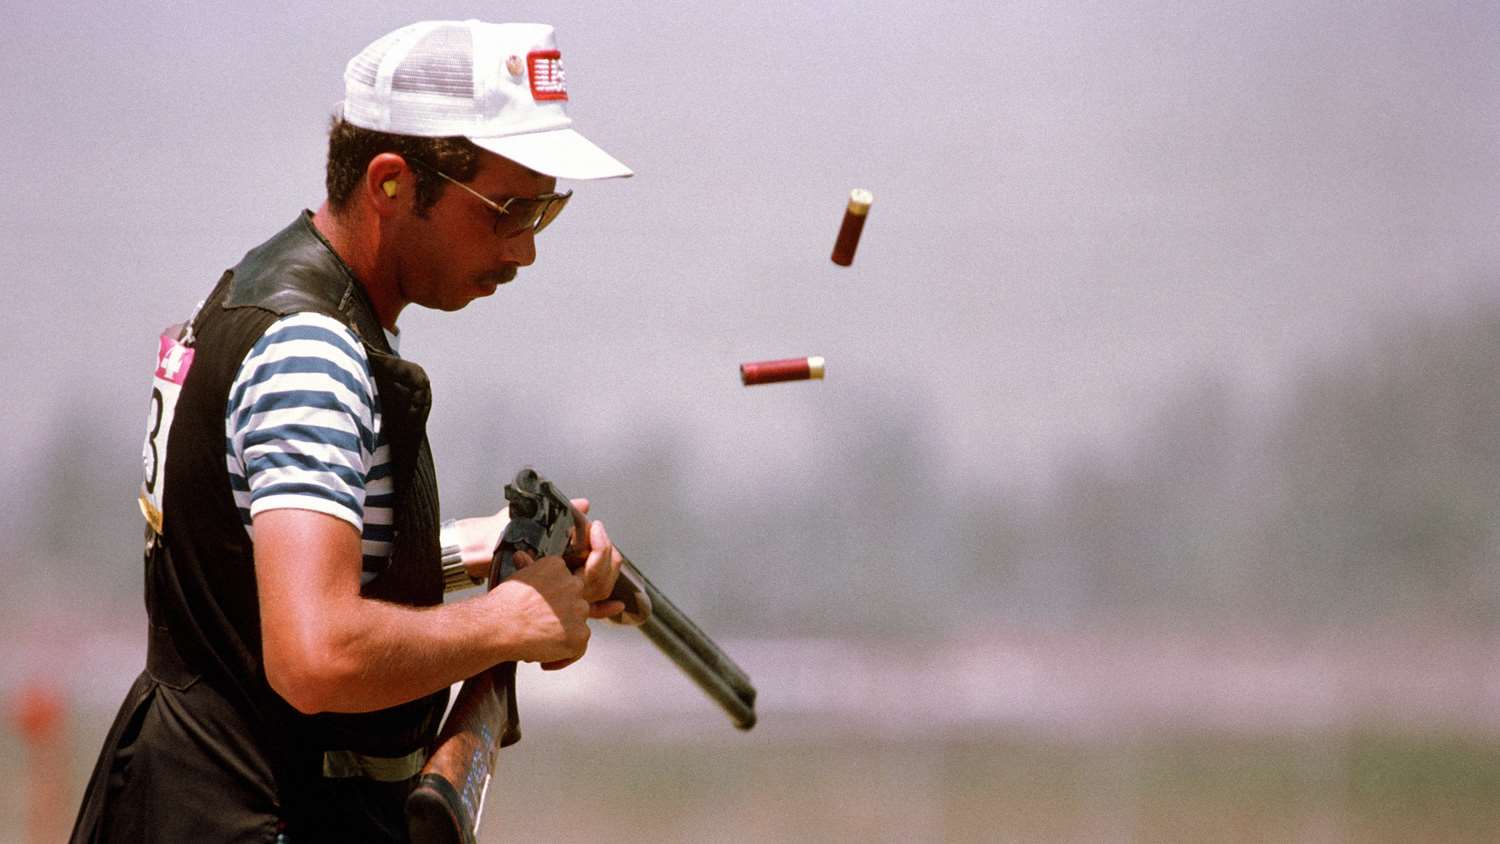 Matthew Dryke competes in the skeet shooting event at the 1984 Summer Olympics